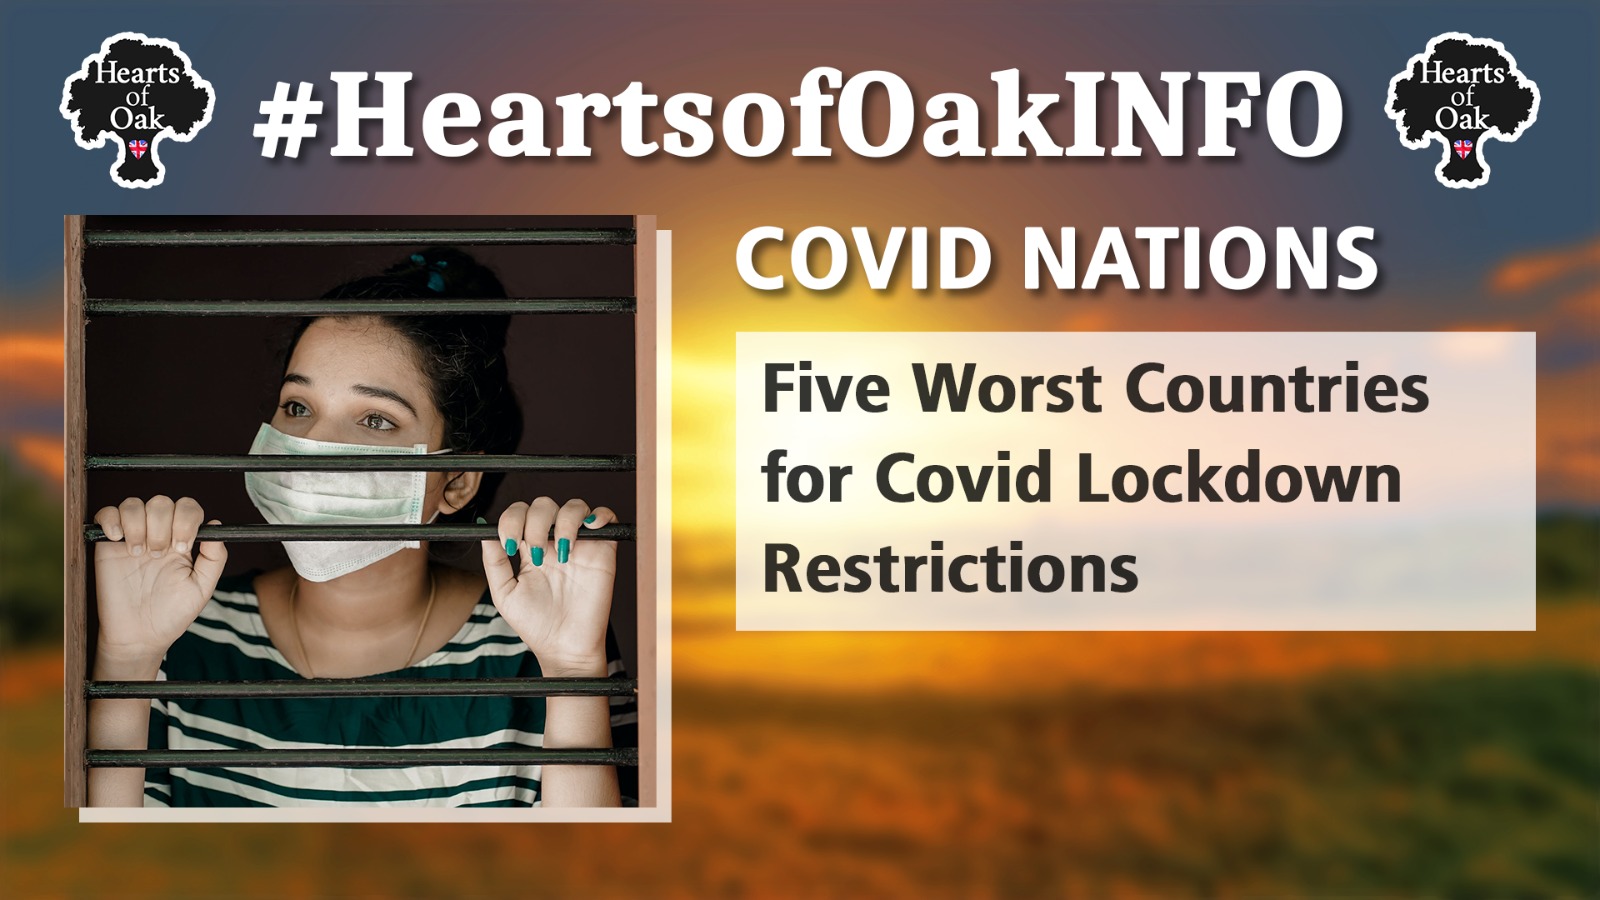 Five Worst Countries for Covid Lockdown Restrictions